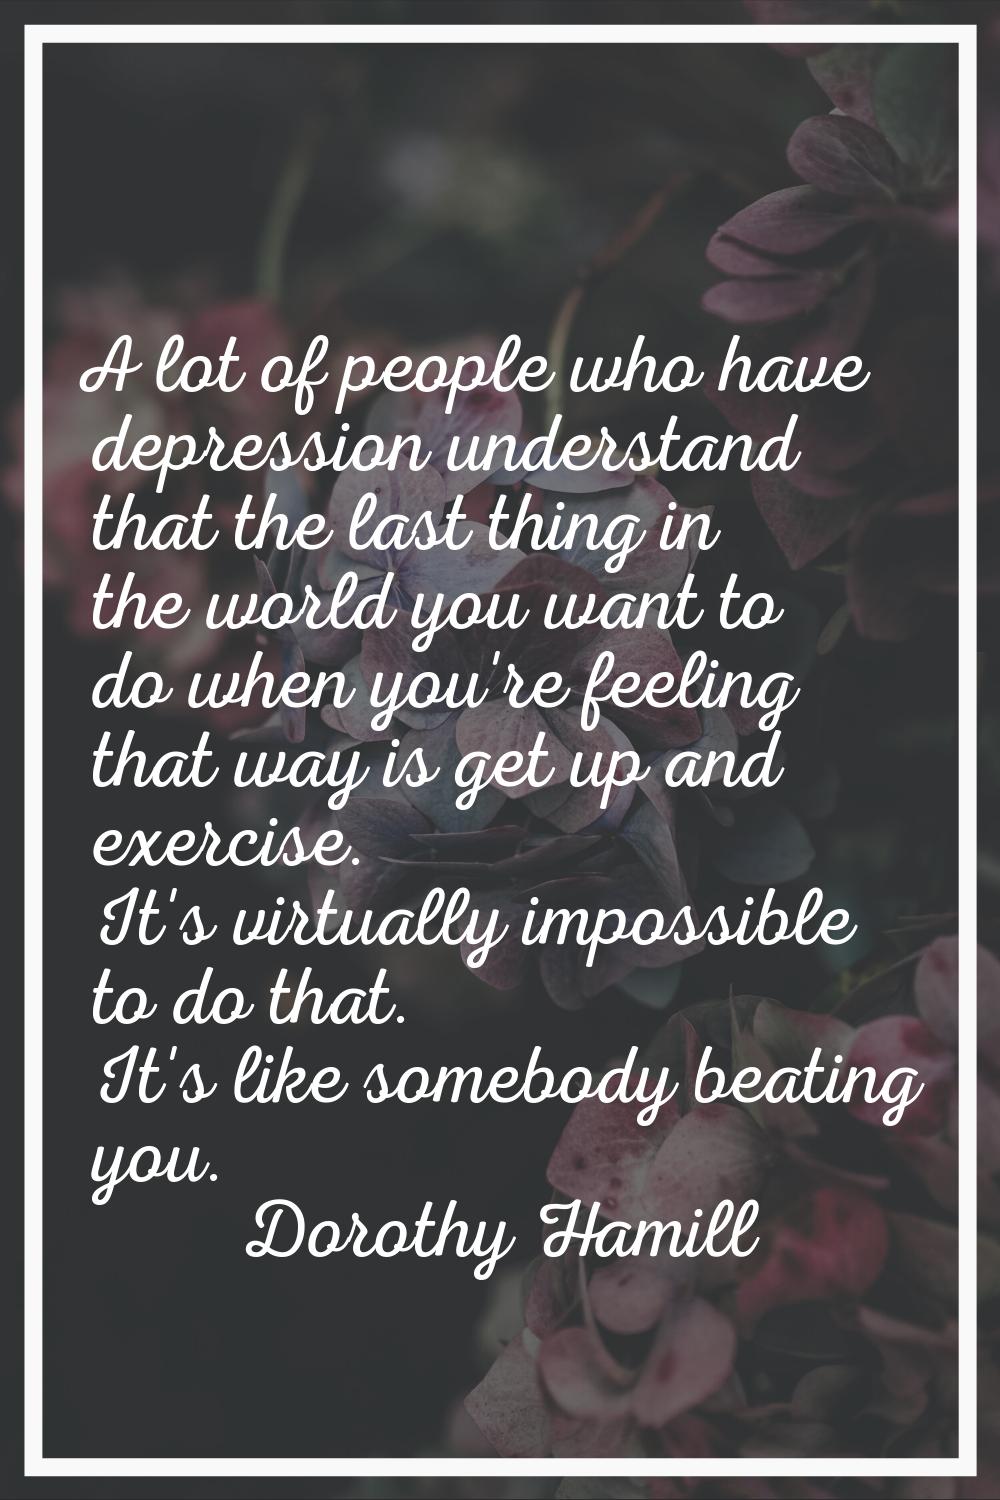 A lot of people who have depression understand that the last thing in the world you want to do when